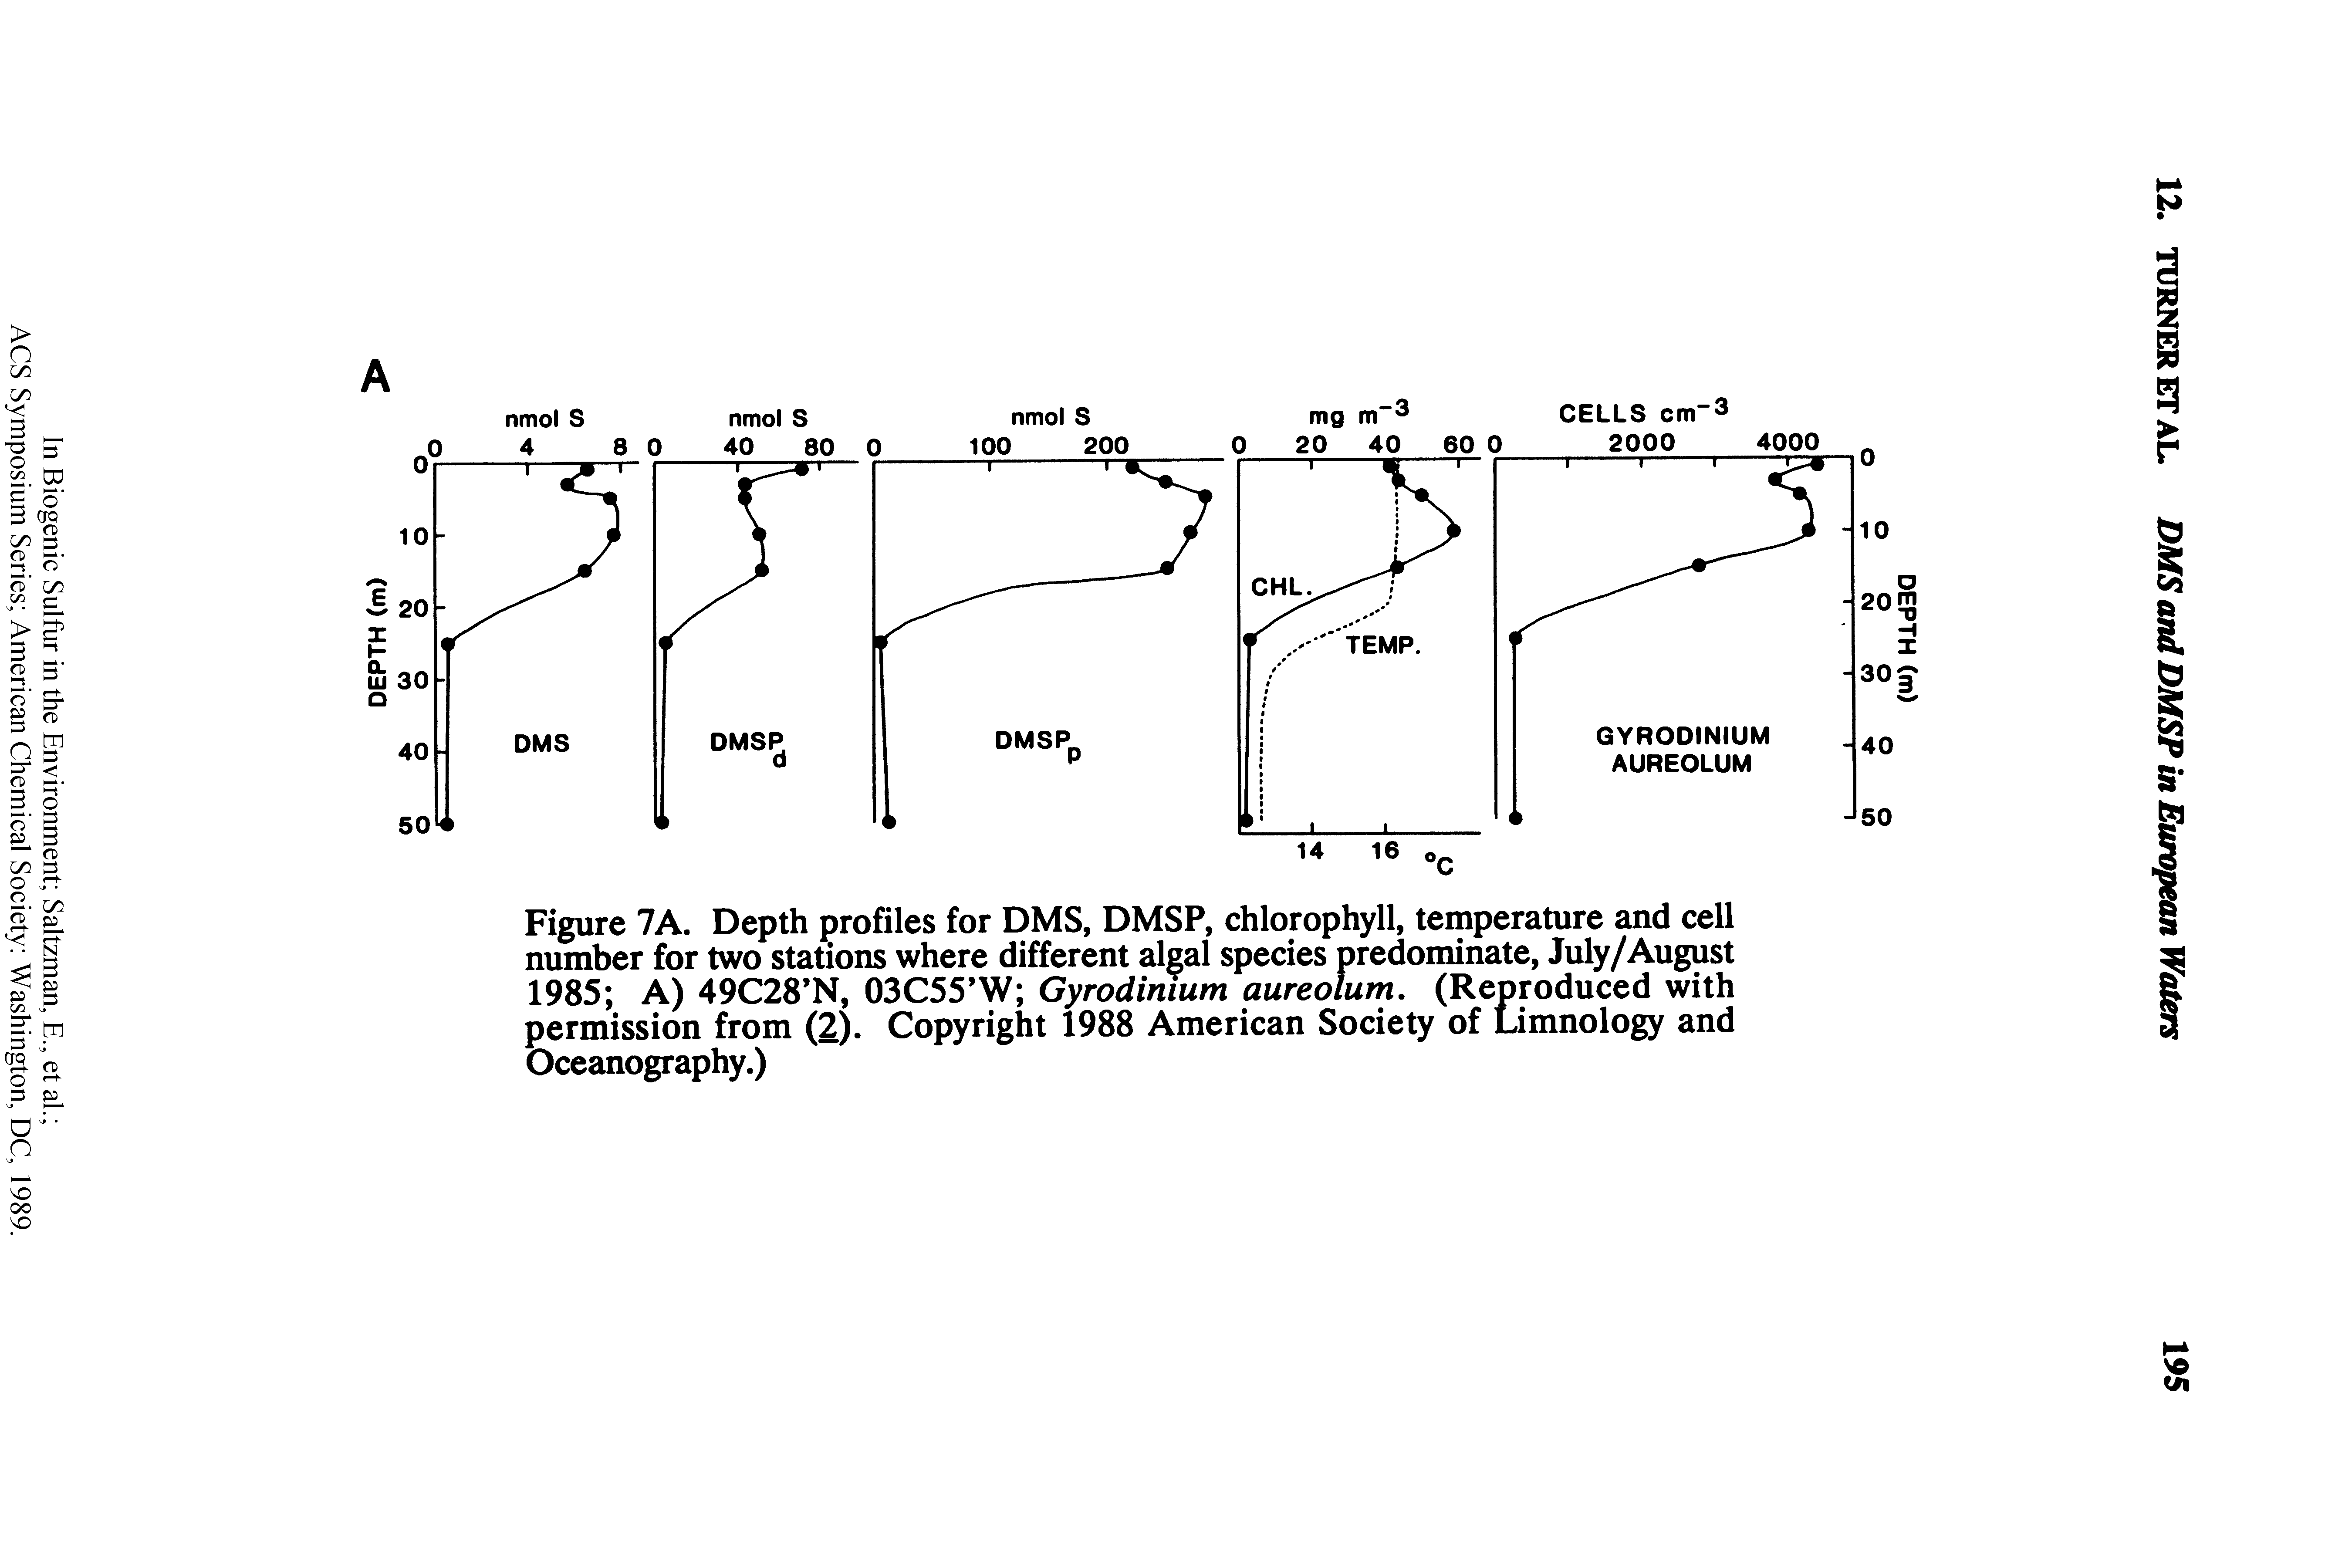 Figure 7A. Depth profiles for DMS, DMSP, chlorophyll, temperature and cell number for two stations where different algal species predominate, July/August 1985 A) 49C28 N, 03C55 W Gyrodinium aureolum. (Reproduced with permission from (2). Copyright 1988 American Society of Limnology and Oceanography.)...